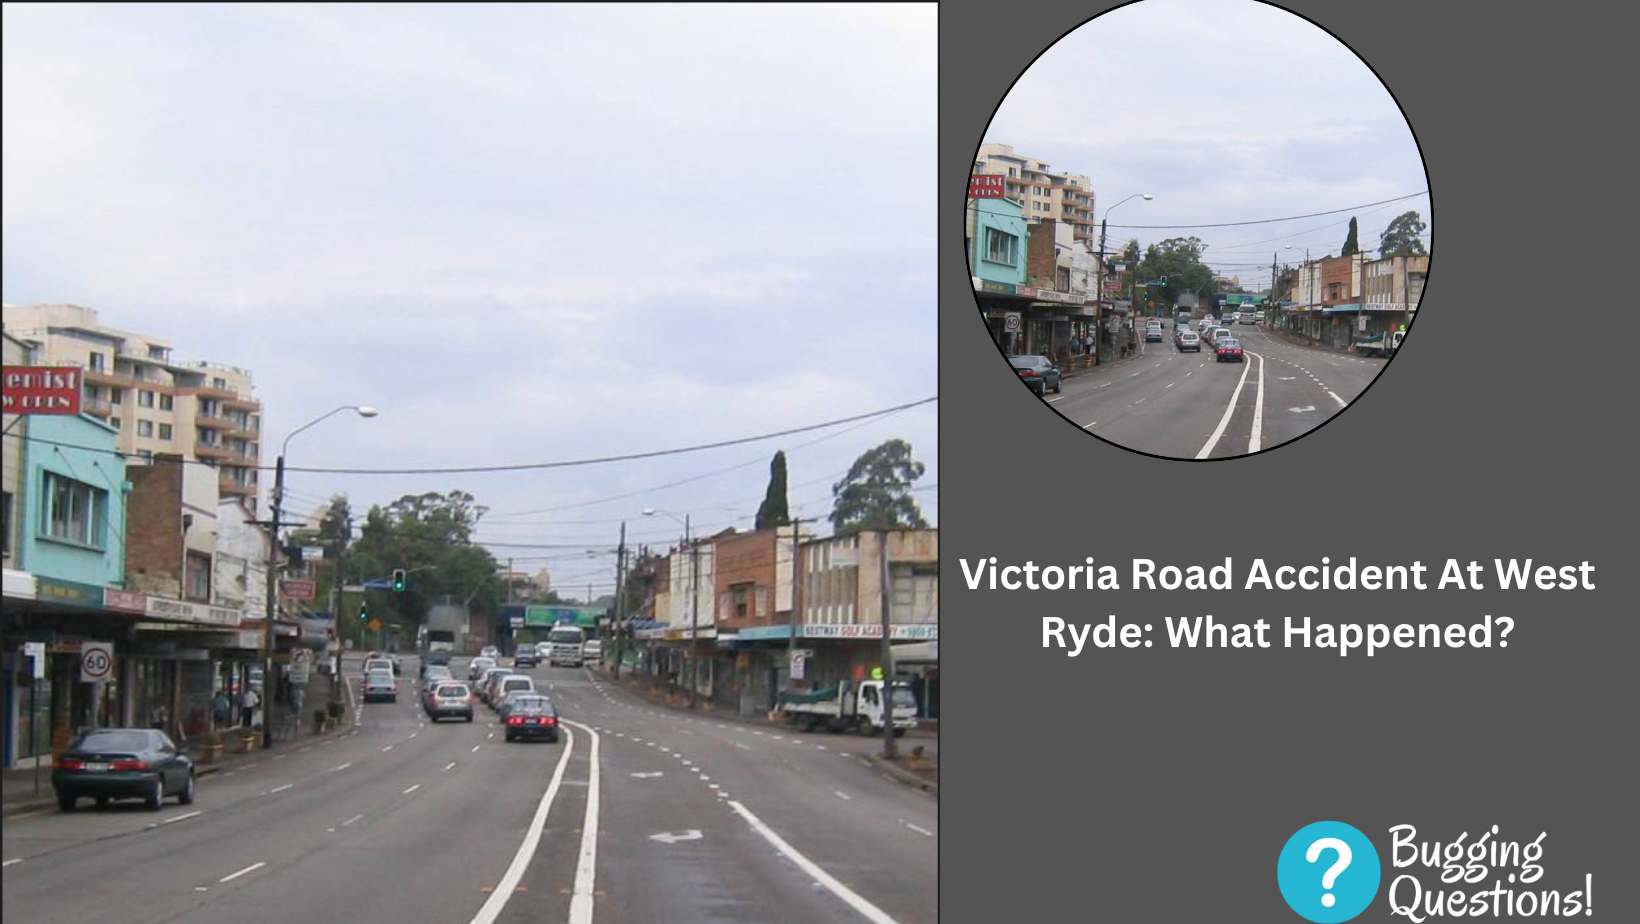 Victoria Road Accident At West Ryde: What Happened?